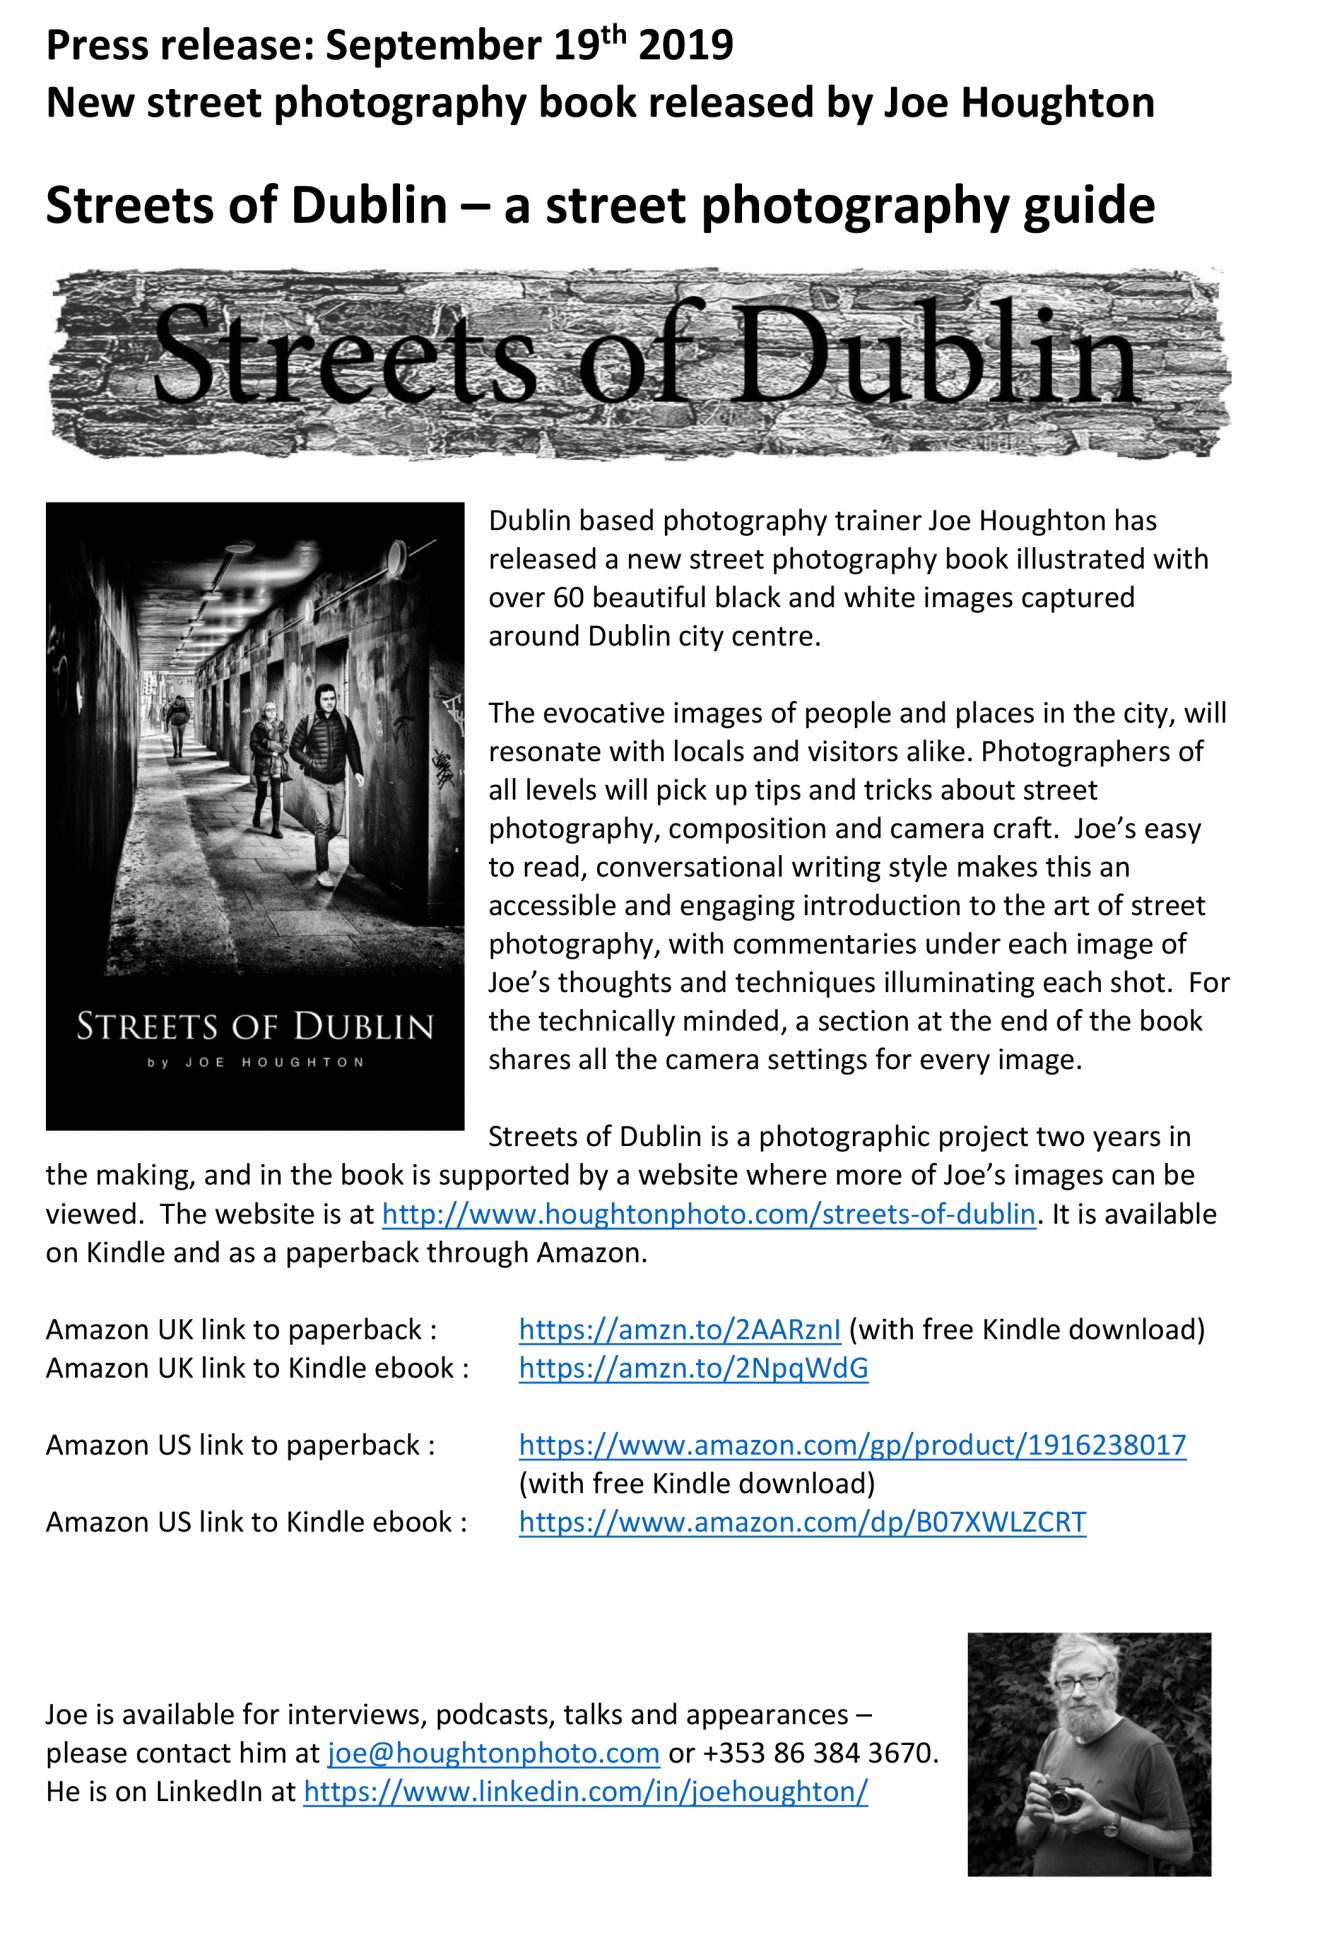 Microsoft Word - Press release for Streets of Dublin - Sept 2019